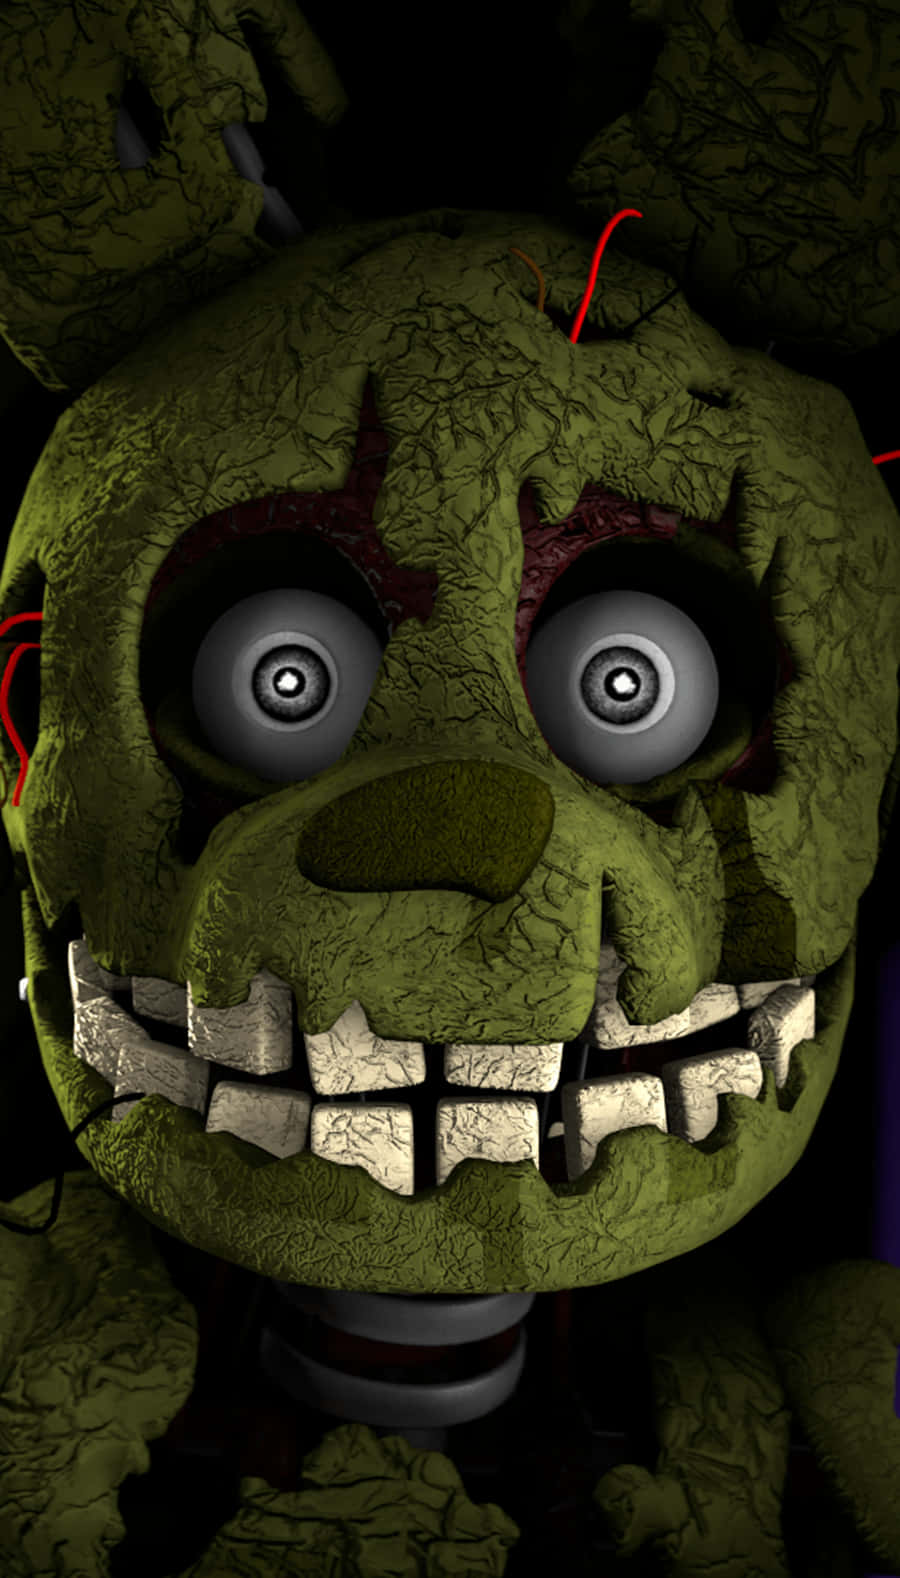 Five Nights At Freddy's - A Green Monster With A Scary Face Wallpaper